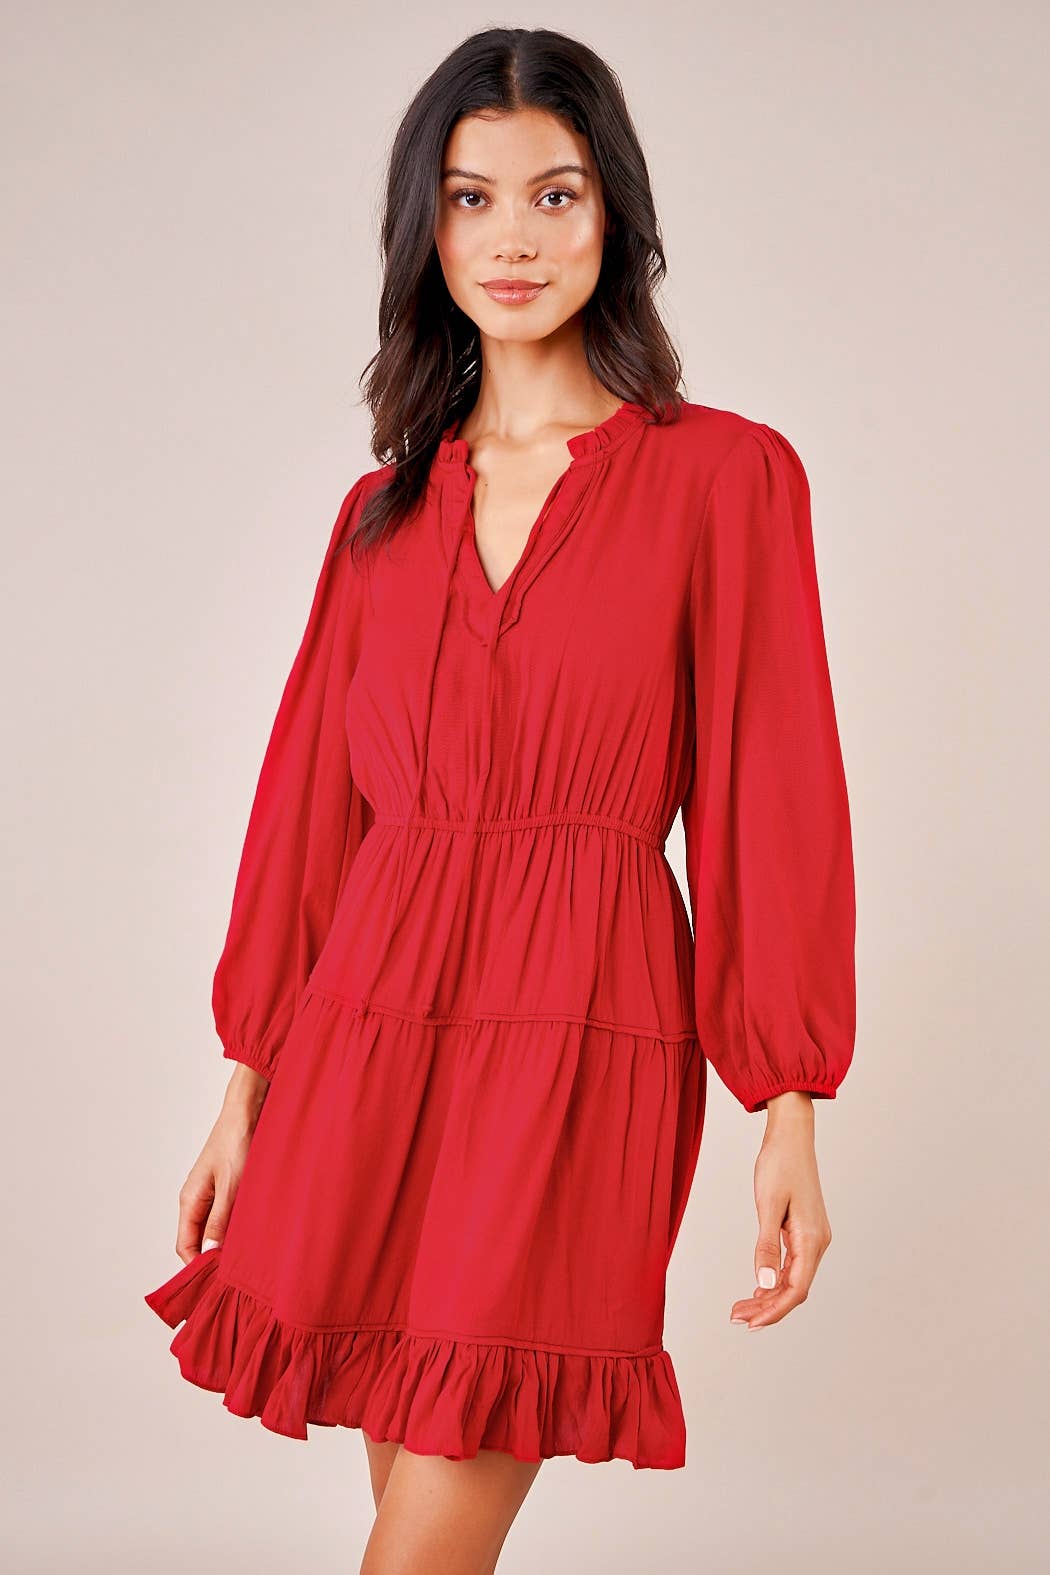 Lilly Long Sleeve Red Dress - Salud HTX